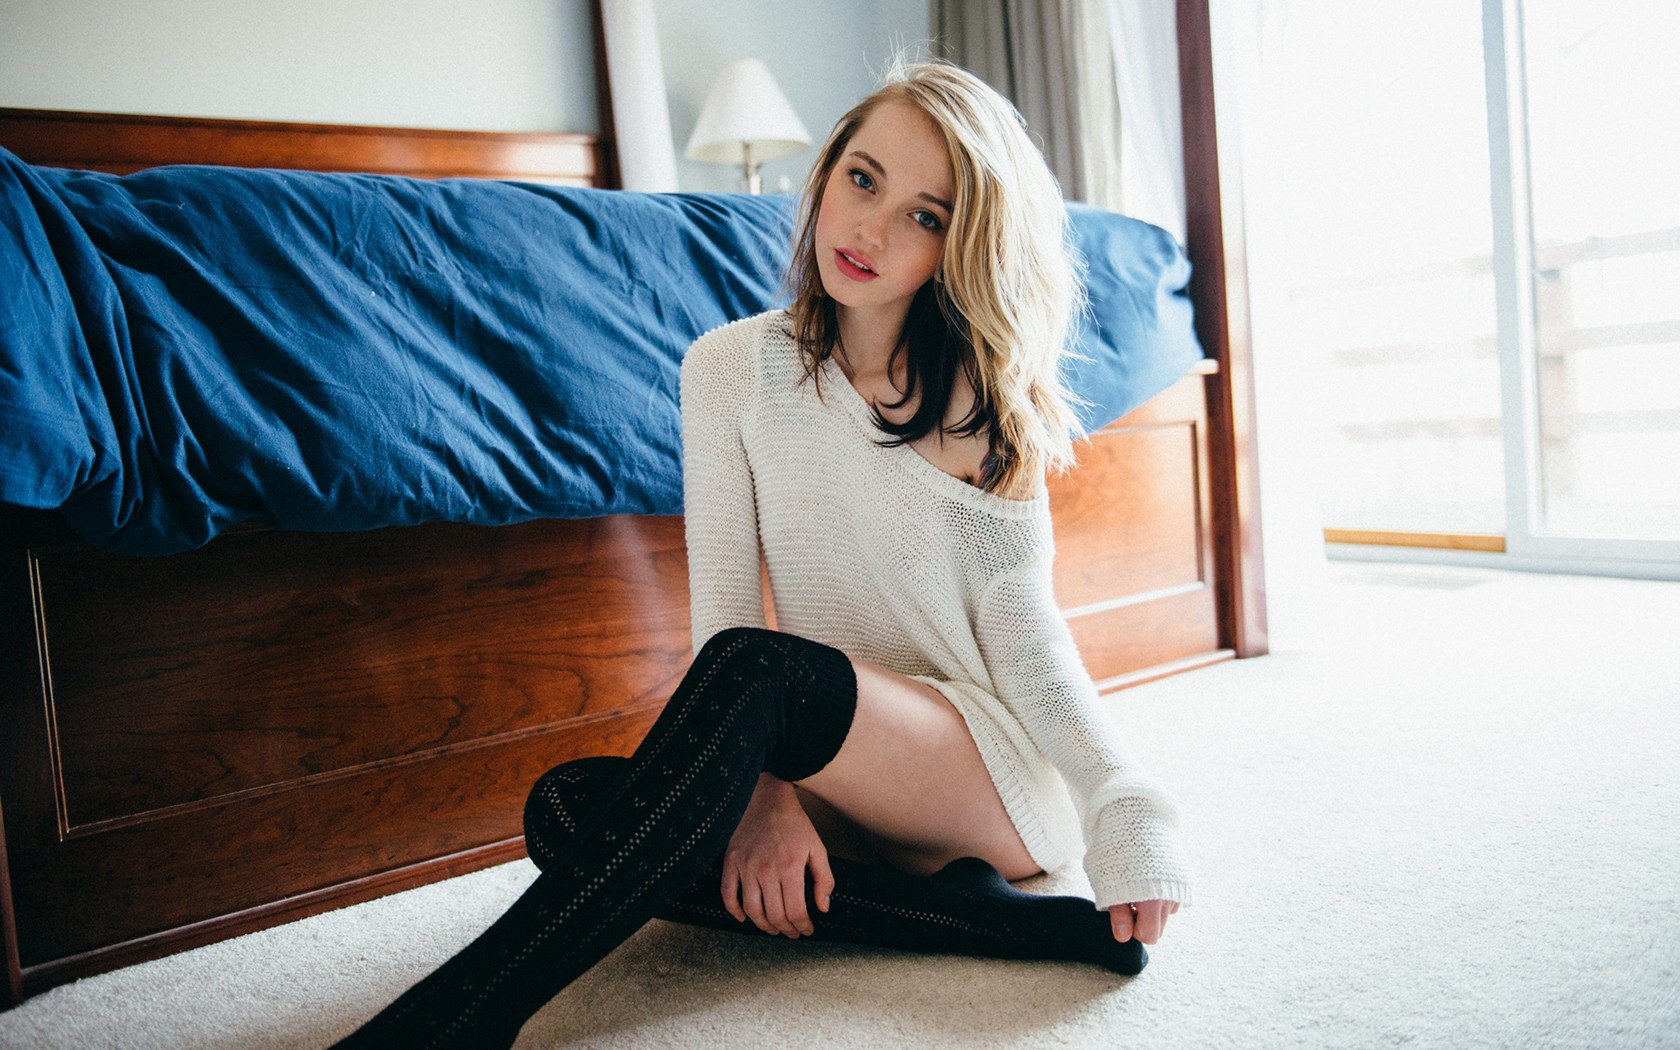 People 1680x1050 women blonde looking at viewer sitting blue eyes bed sweater white sweater on the floor hand on leg long sleeves in bedroom pointed toes women indoors stockings black stockings indoors model thighs legs red lipstick bedroom